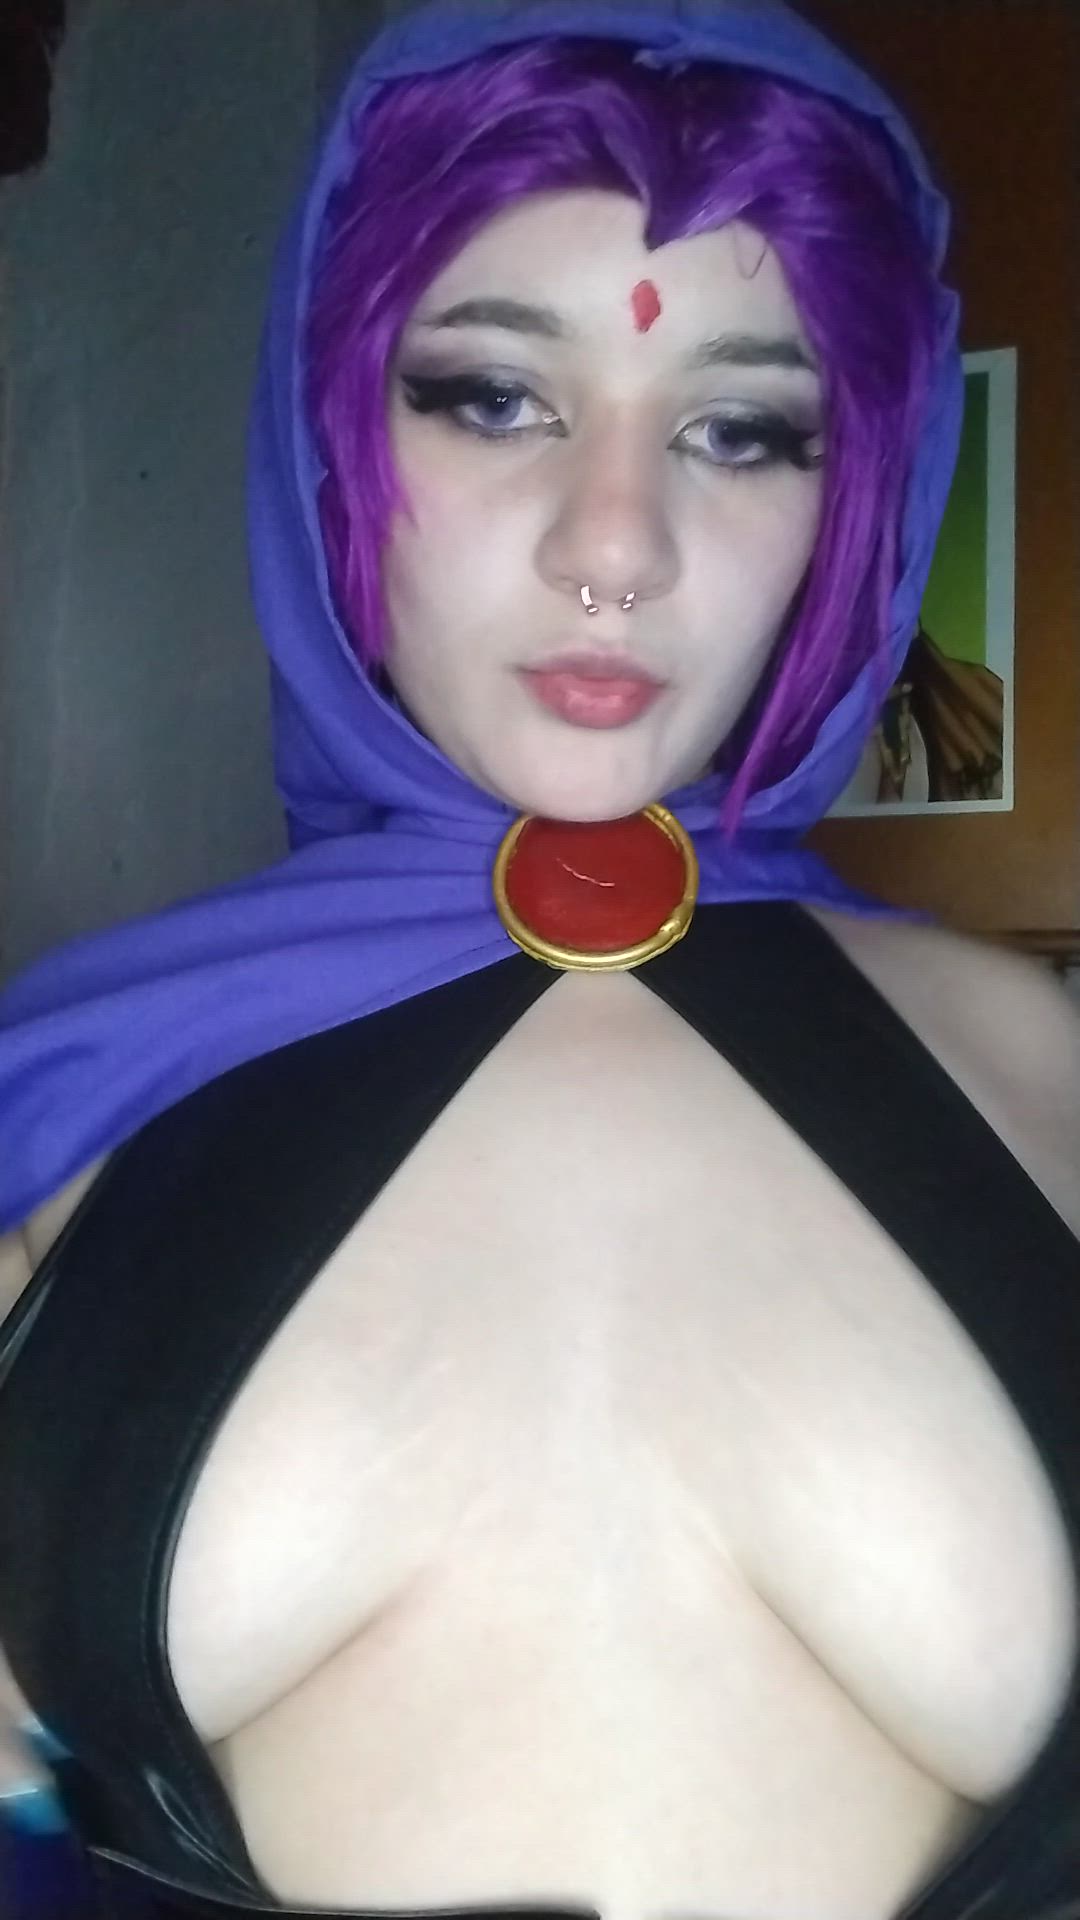 Big Tits porn video with onlyfans model ladylokicosplay <strong>@ladylokicosplay3</strong>